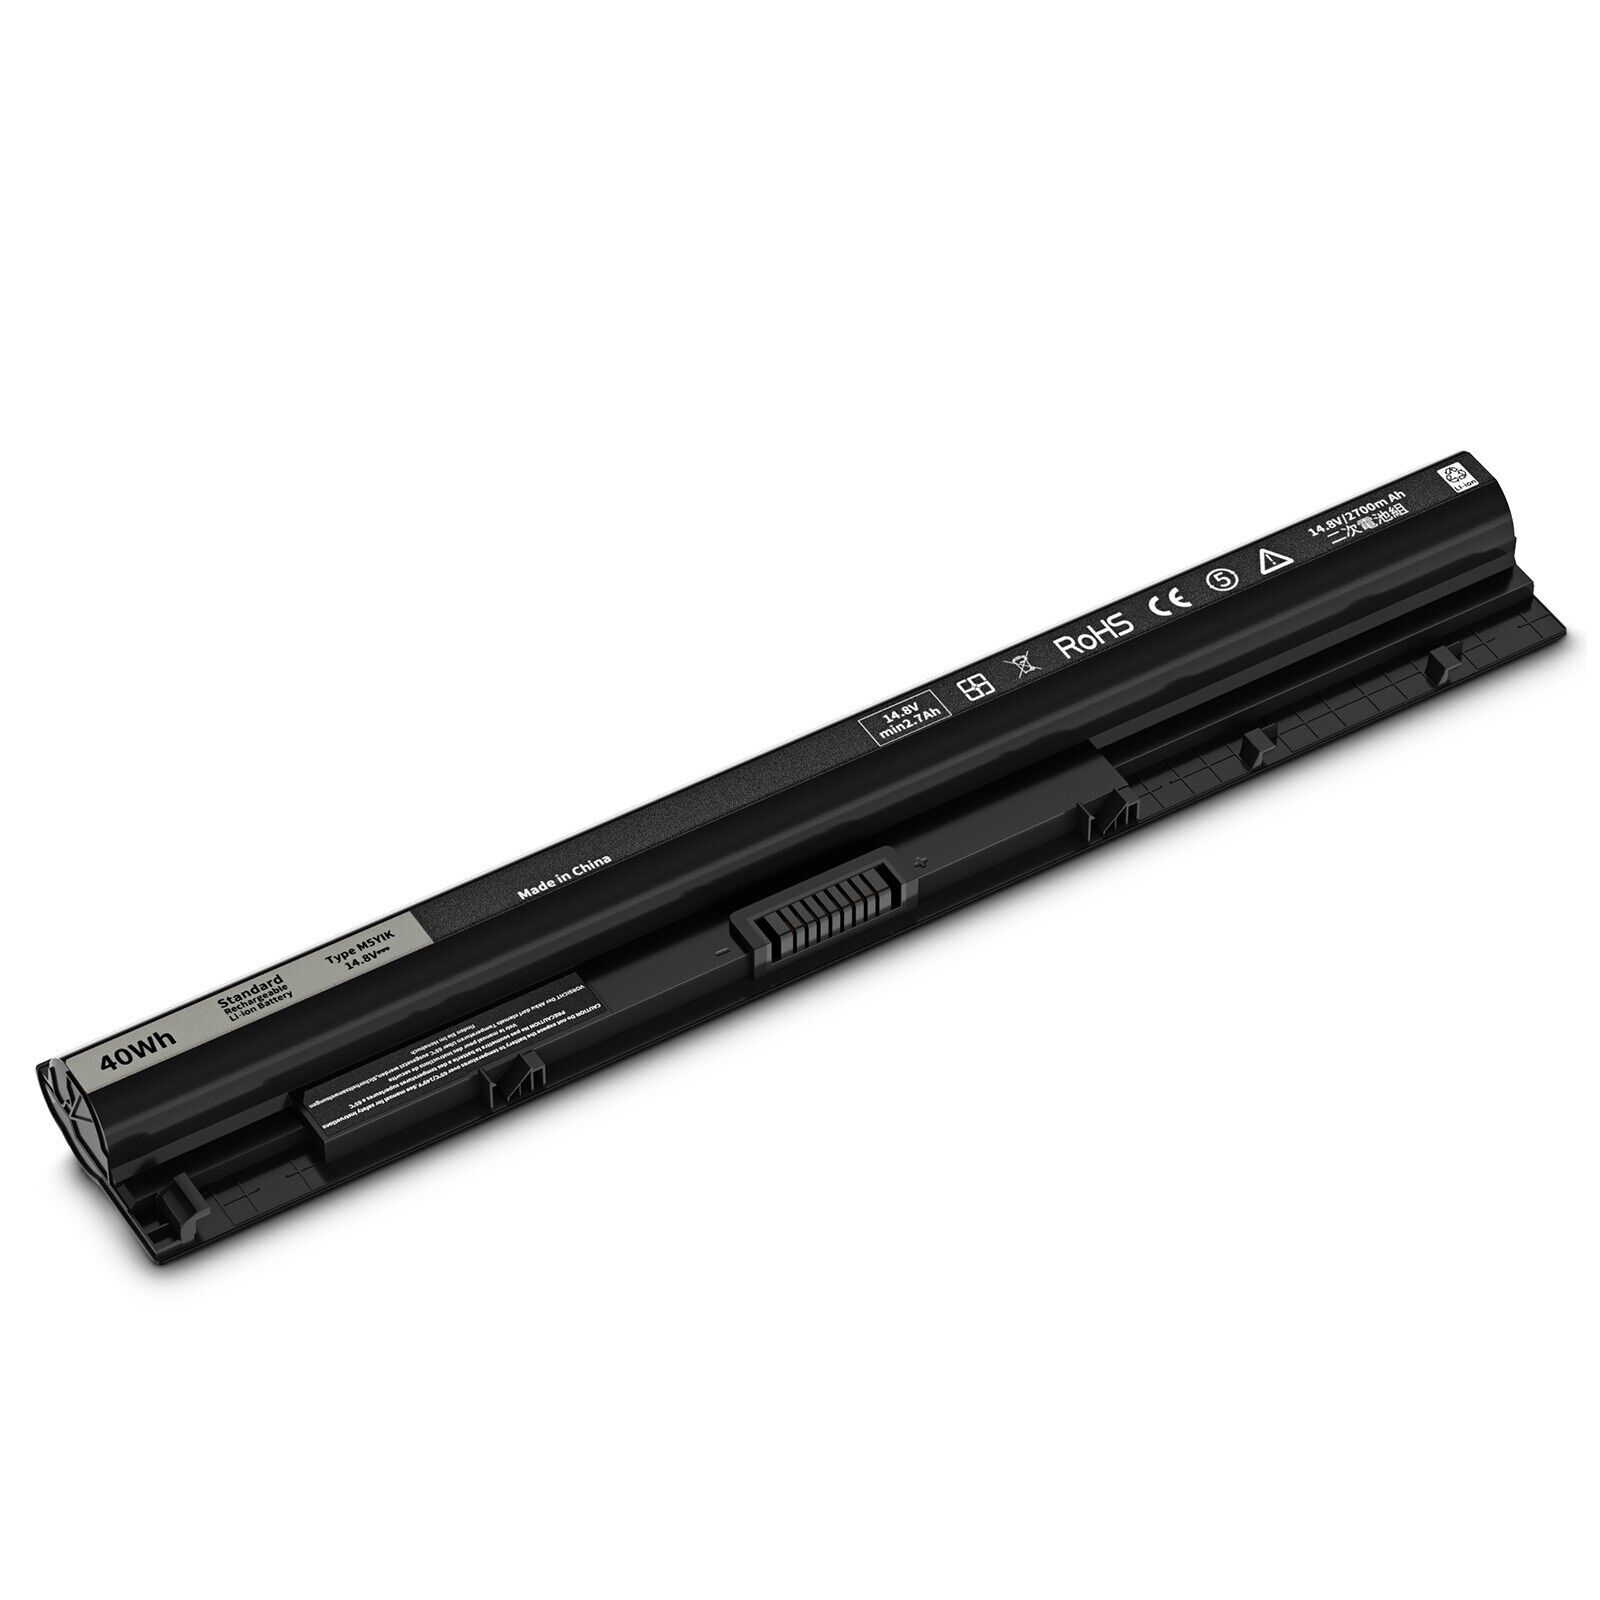 M5Y1K Battery for Dell Inspiron 3451 3551 3458 3558 5551 5558 5559 07G07 Genuine